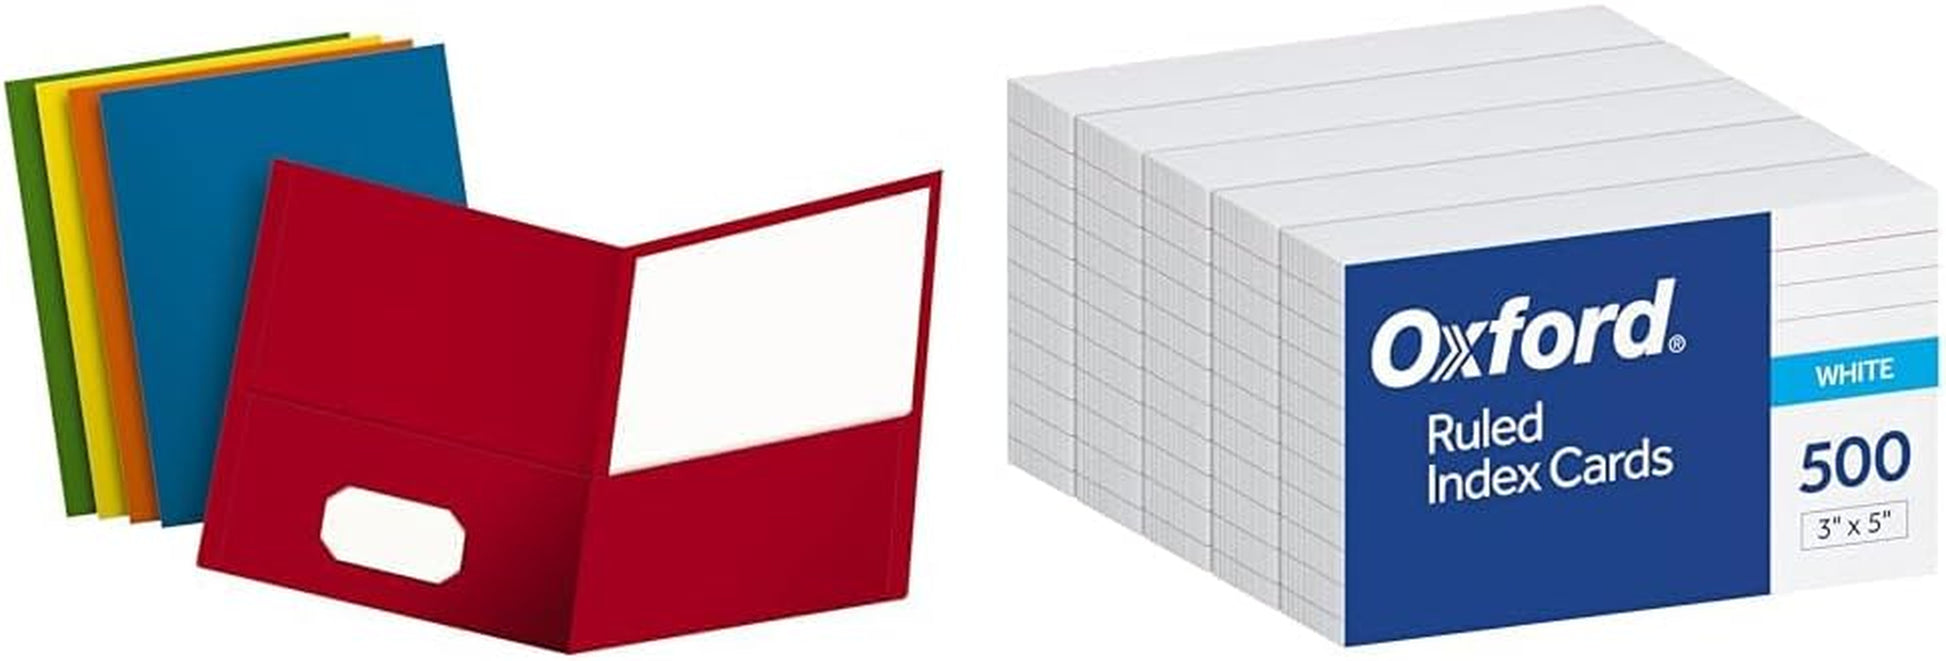 Two-Pocket Folders, Assorted Colors, Letter Size, 25 per Box (57513)